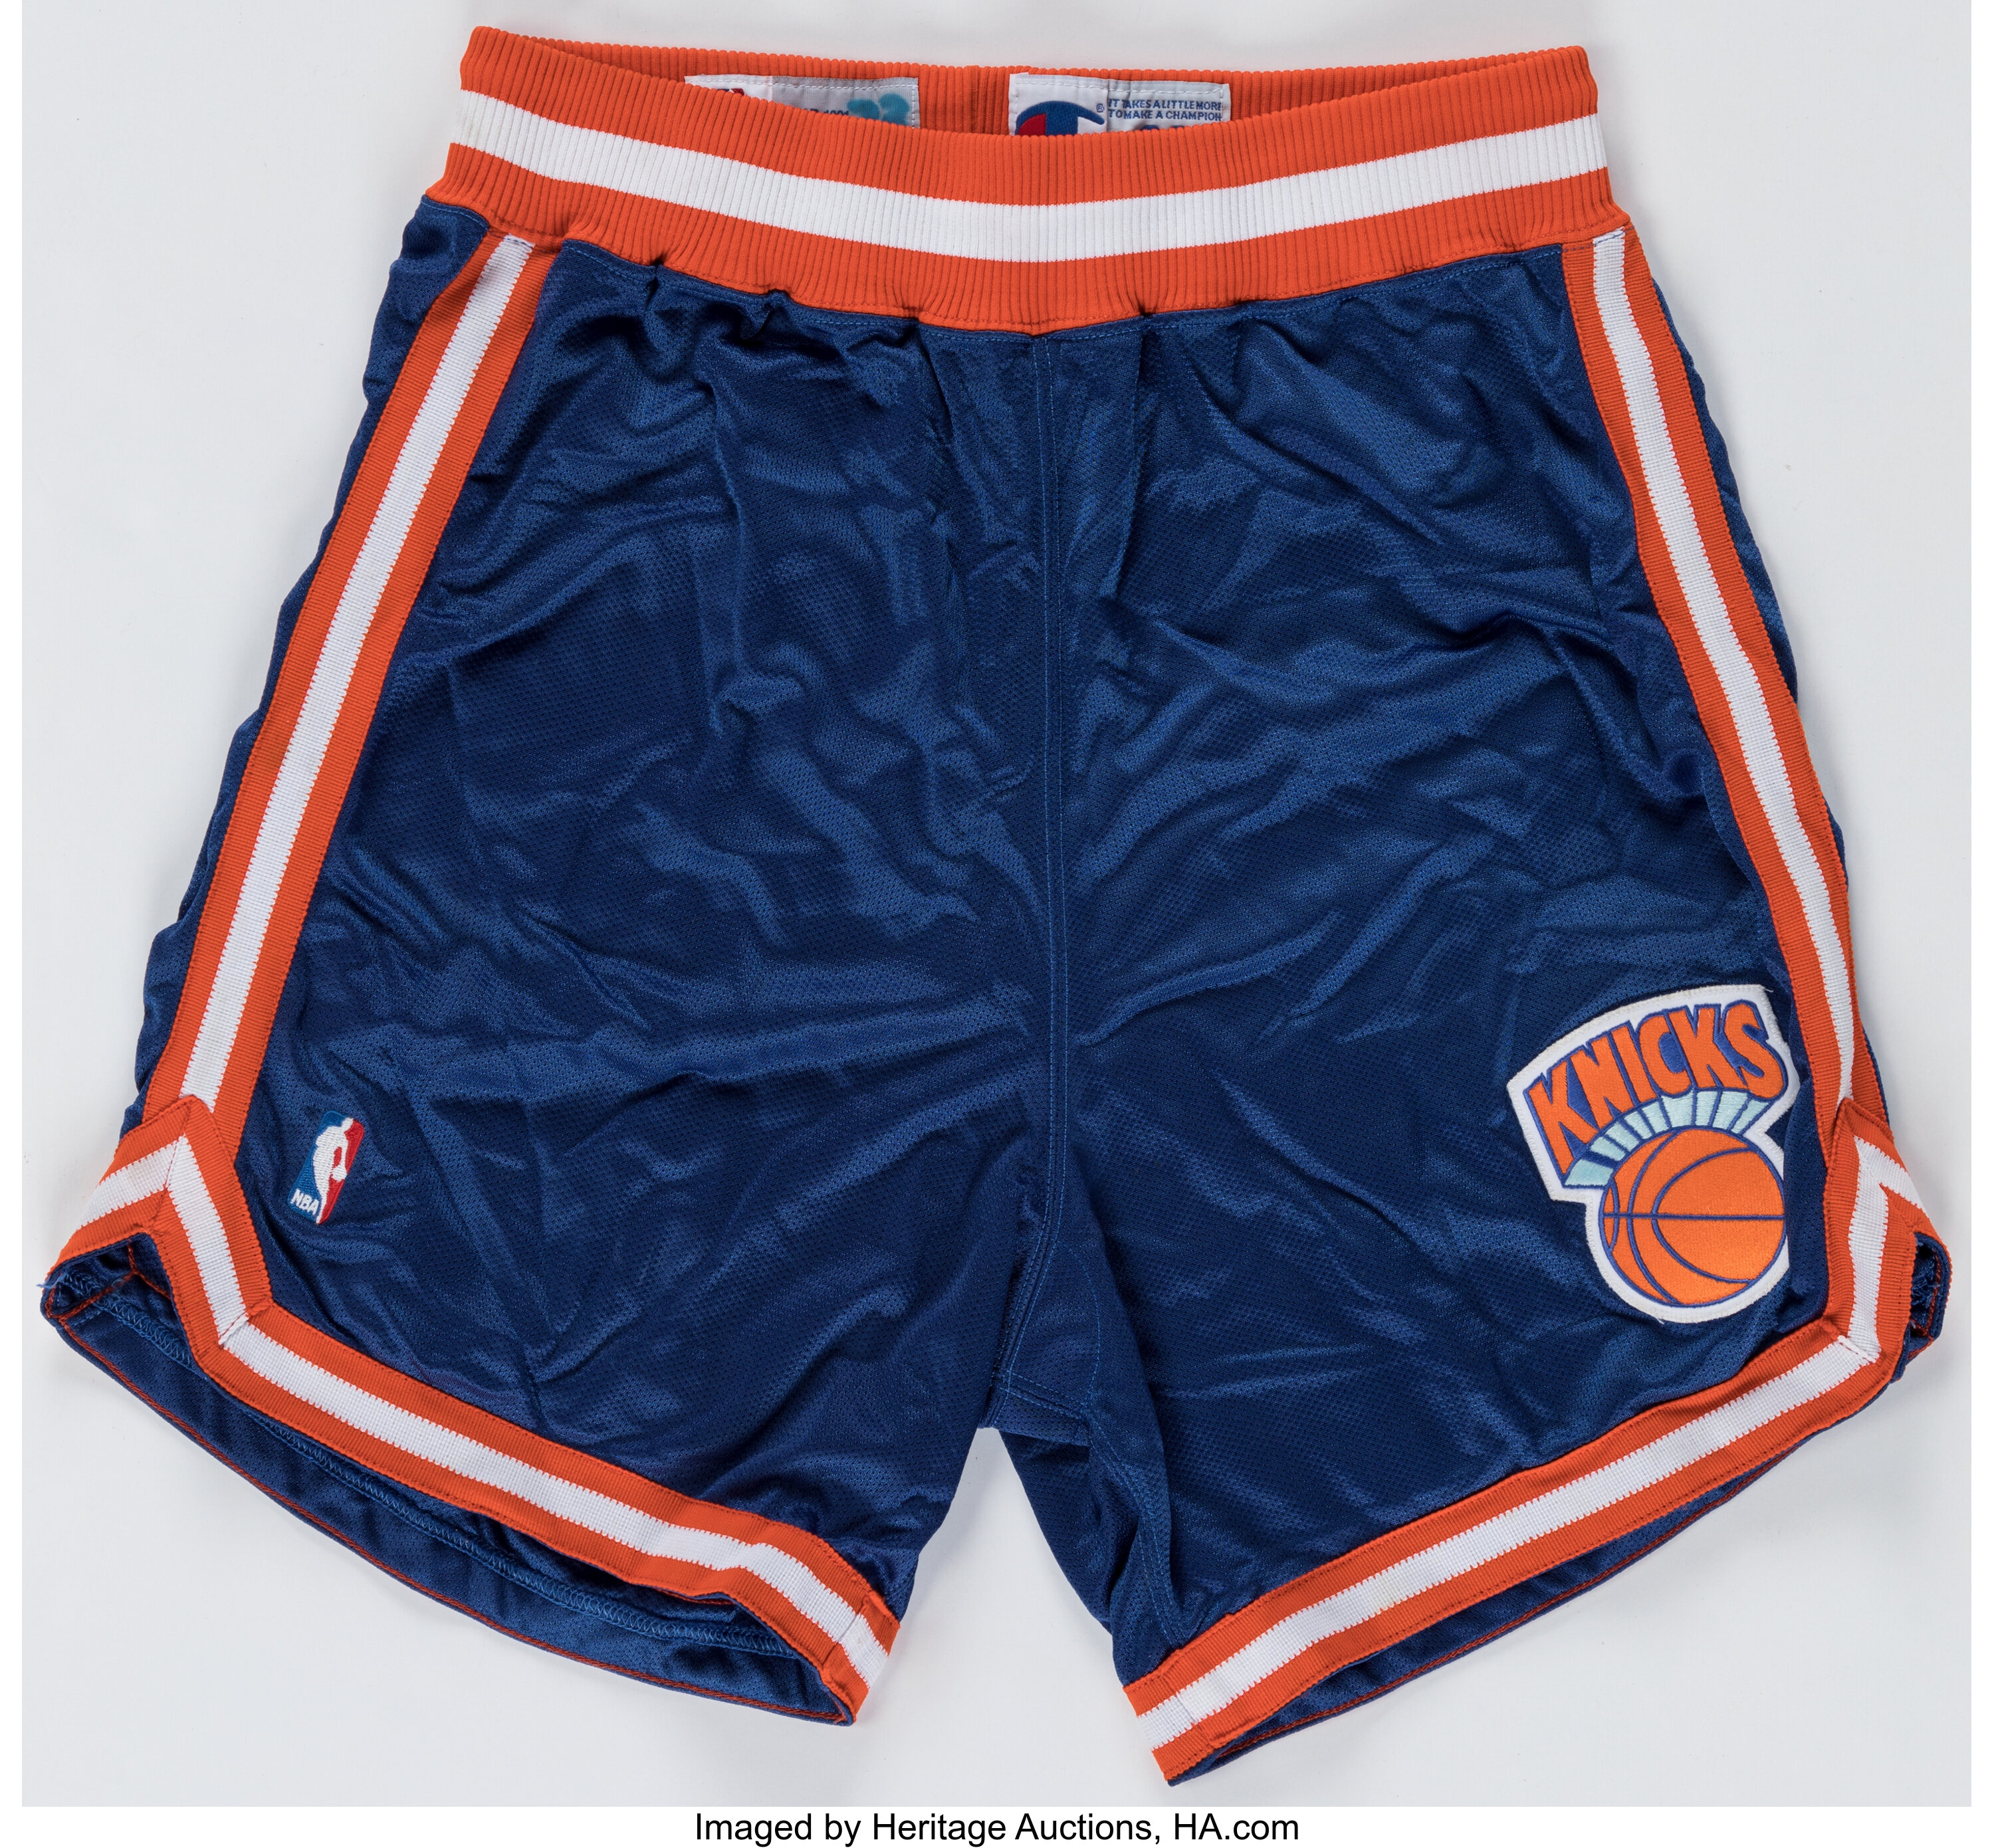 1991 Patrick Ewing Game Worn New York Knicks Shorts with Trainer, Lot  #42240